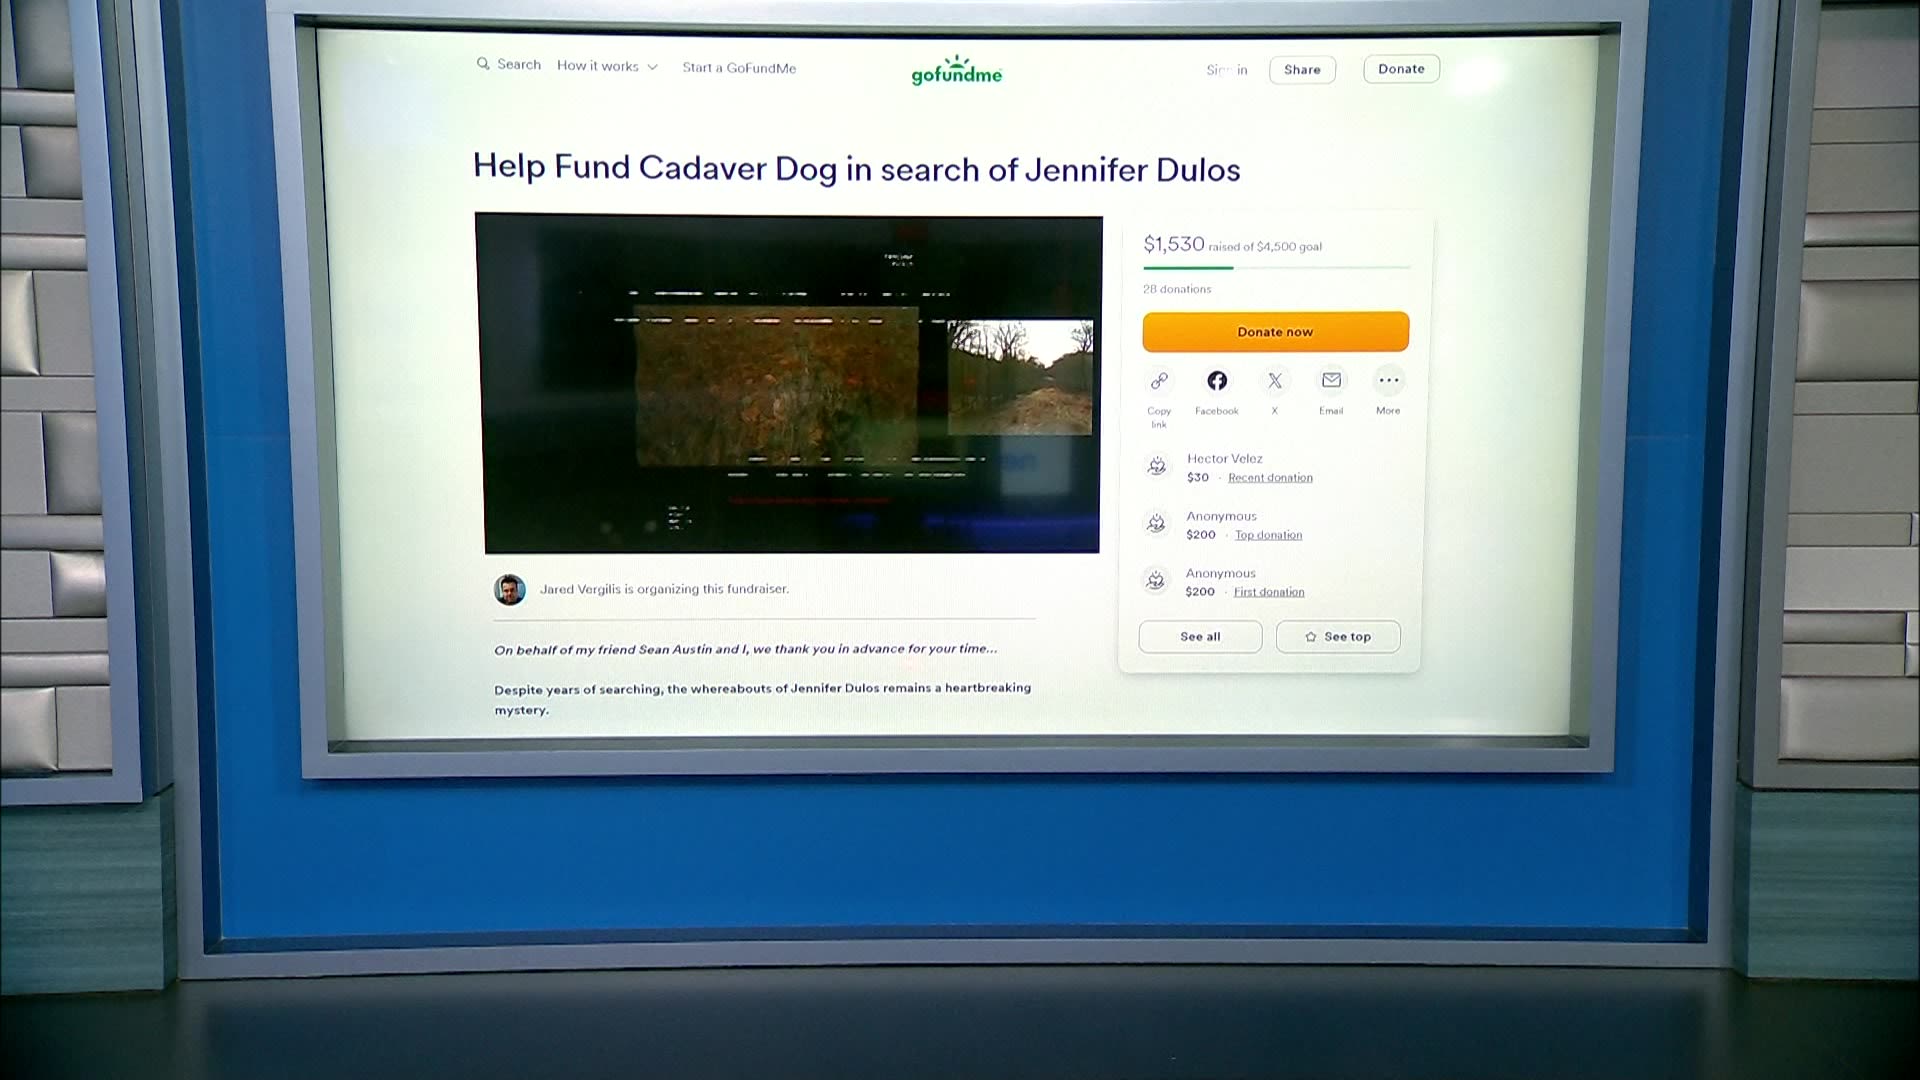 Connecticut residents raising money for cadaver dogs with goal of finding Jennifer Dulos